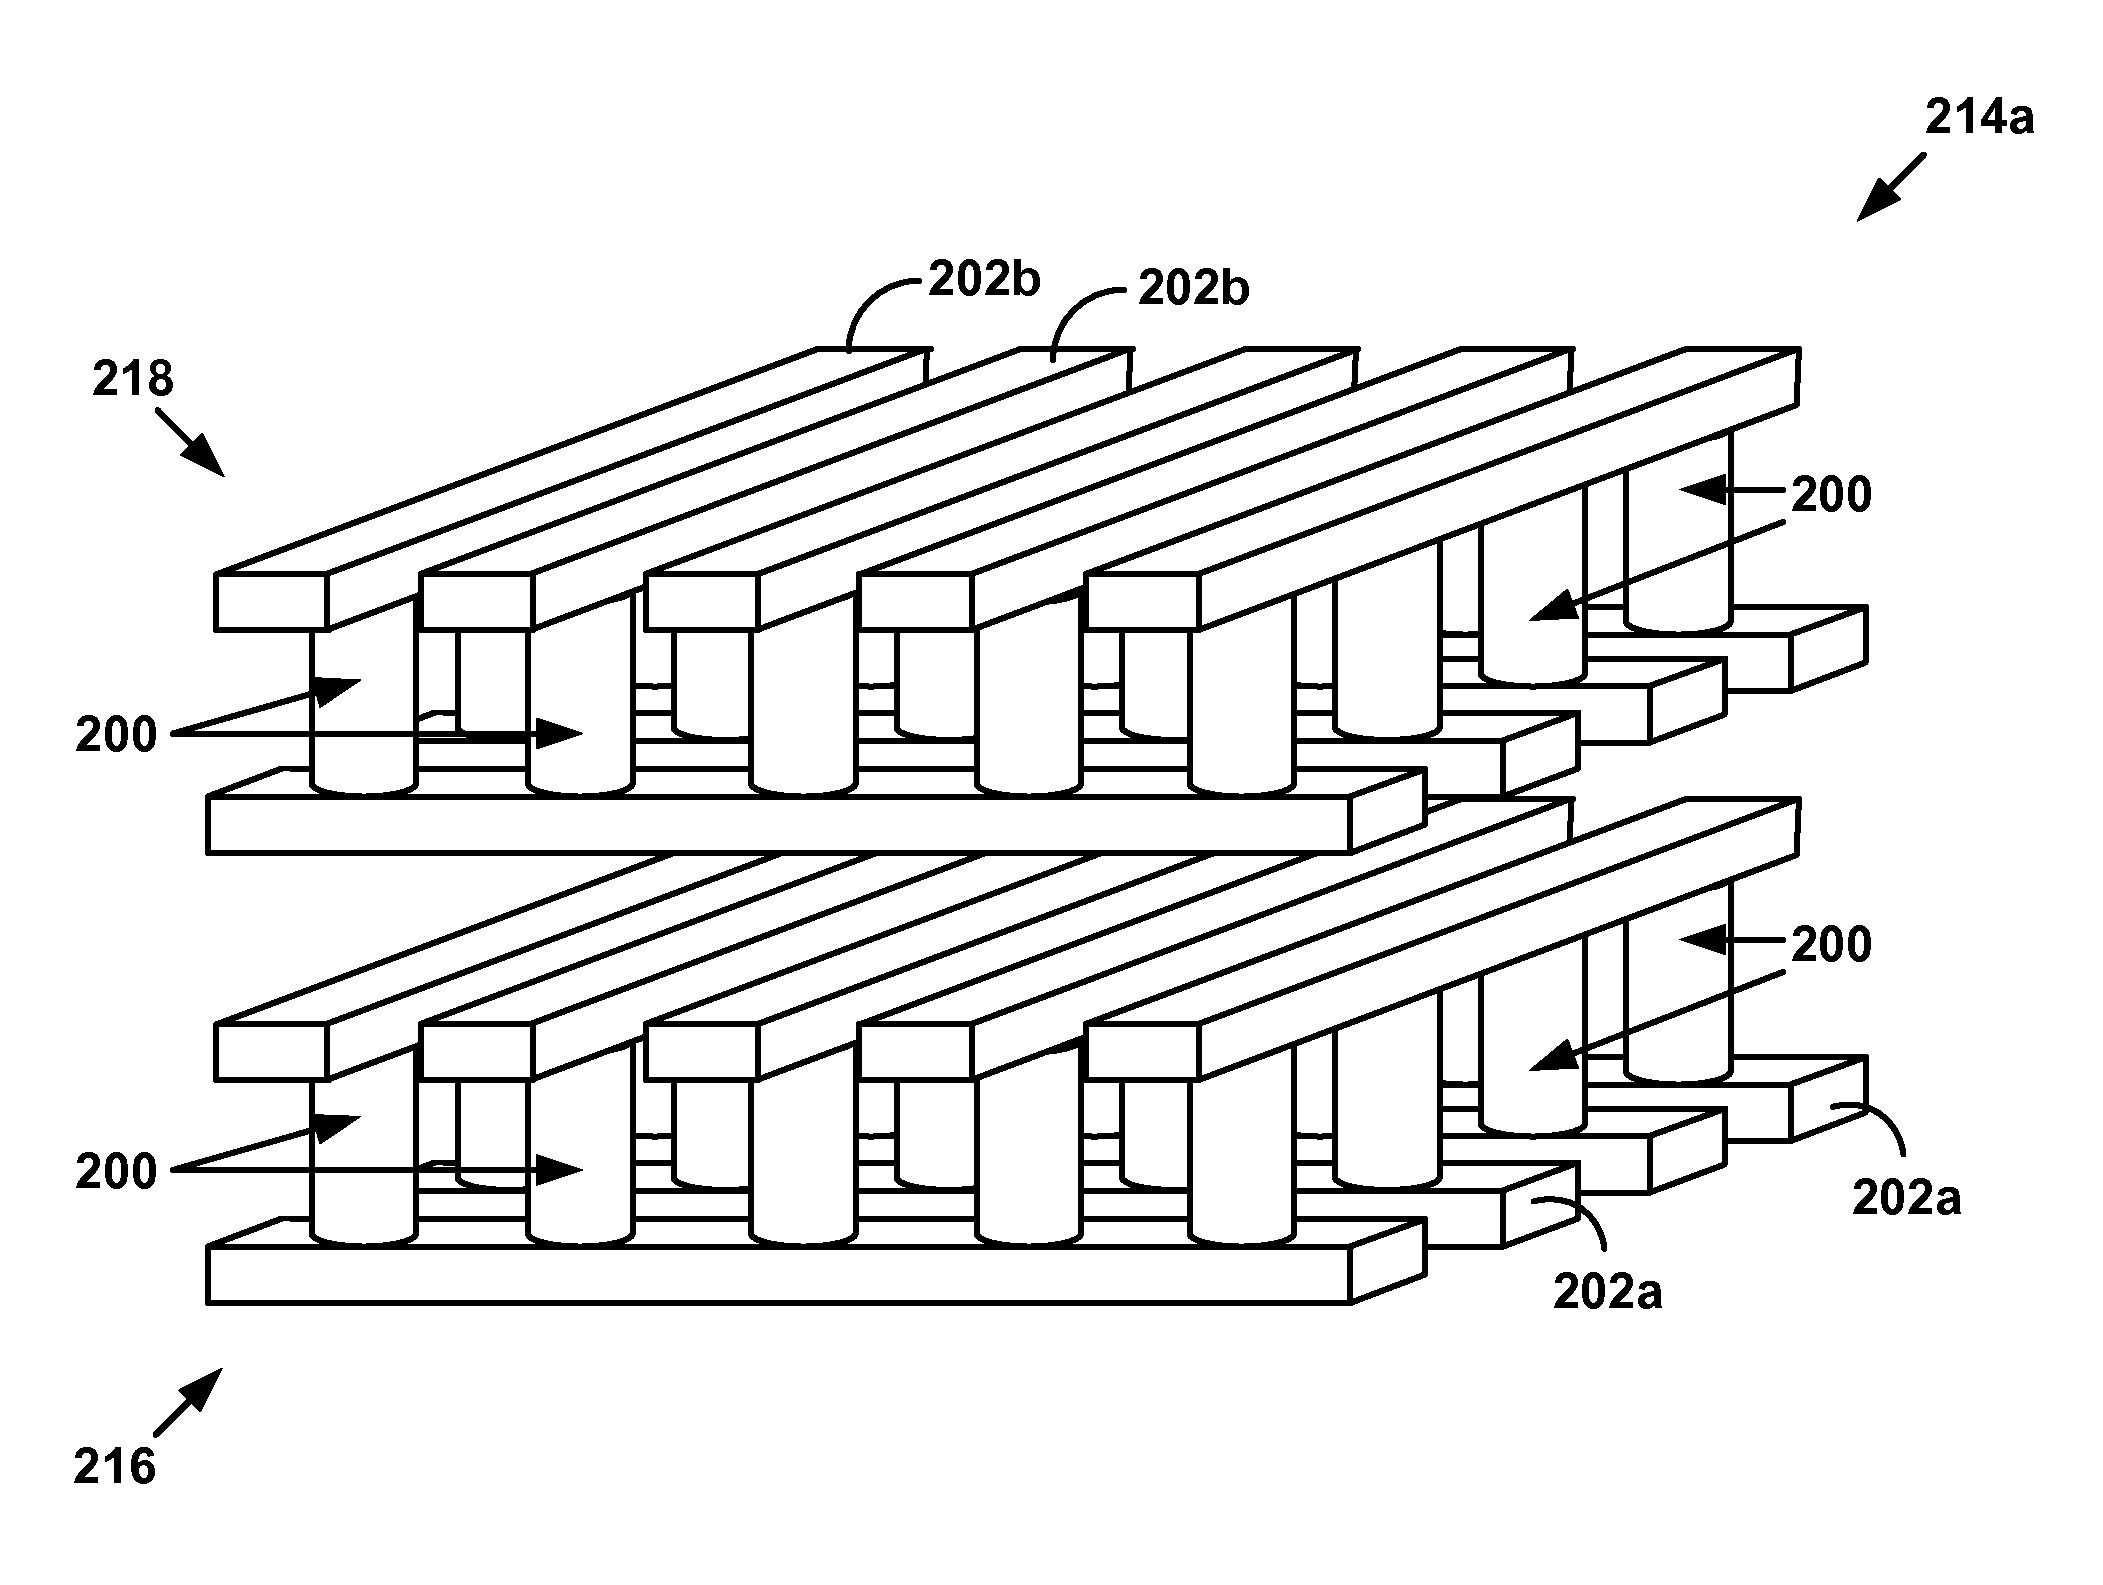 Multi-level memory arrays with memory cells that employ bipolar storage elements and methods of forming the same